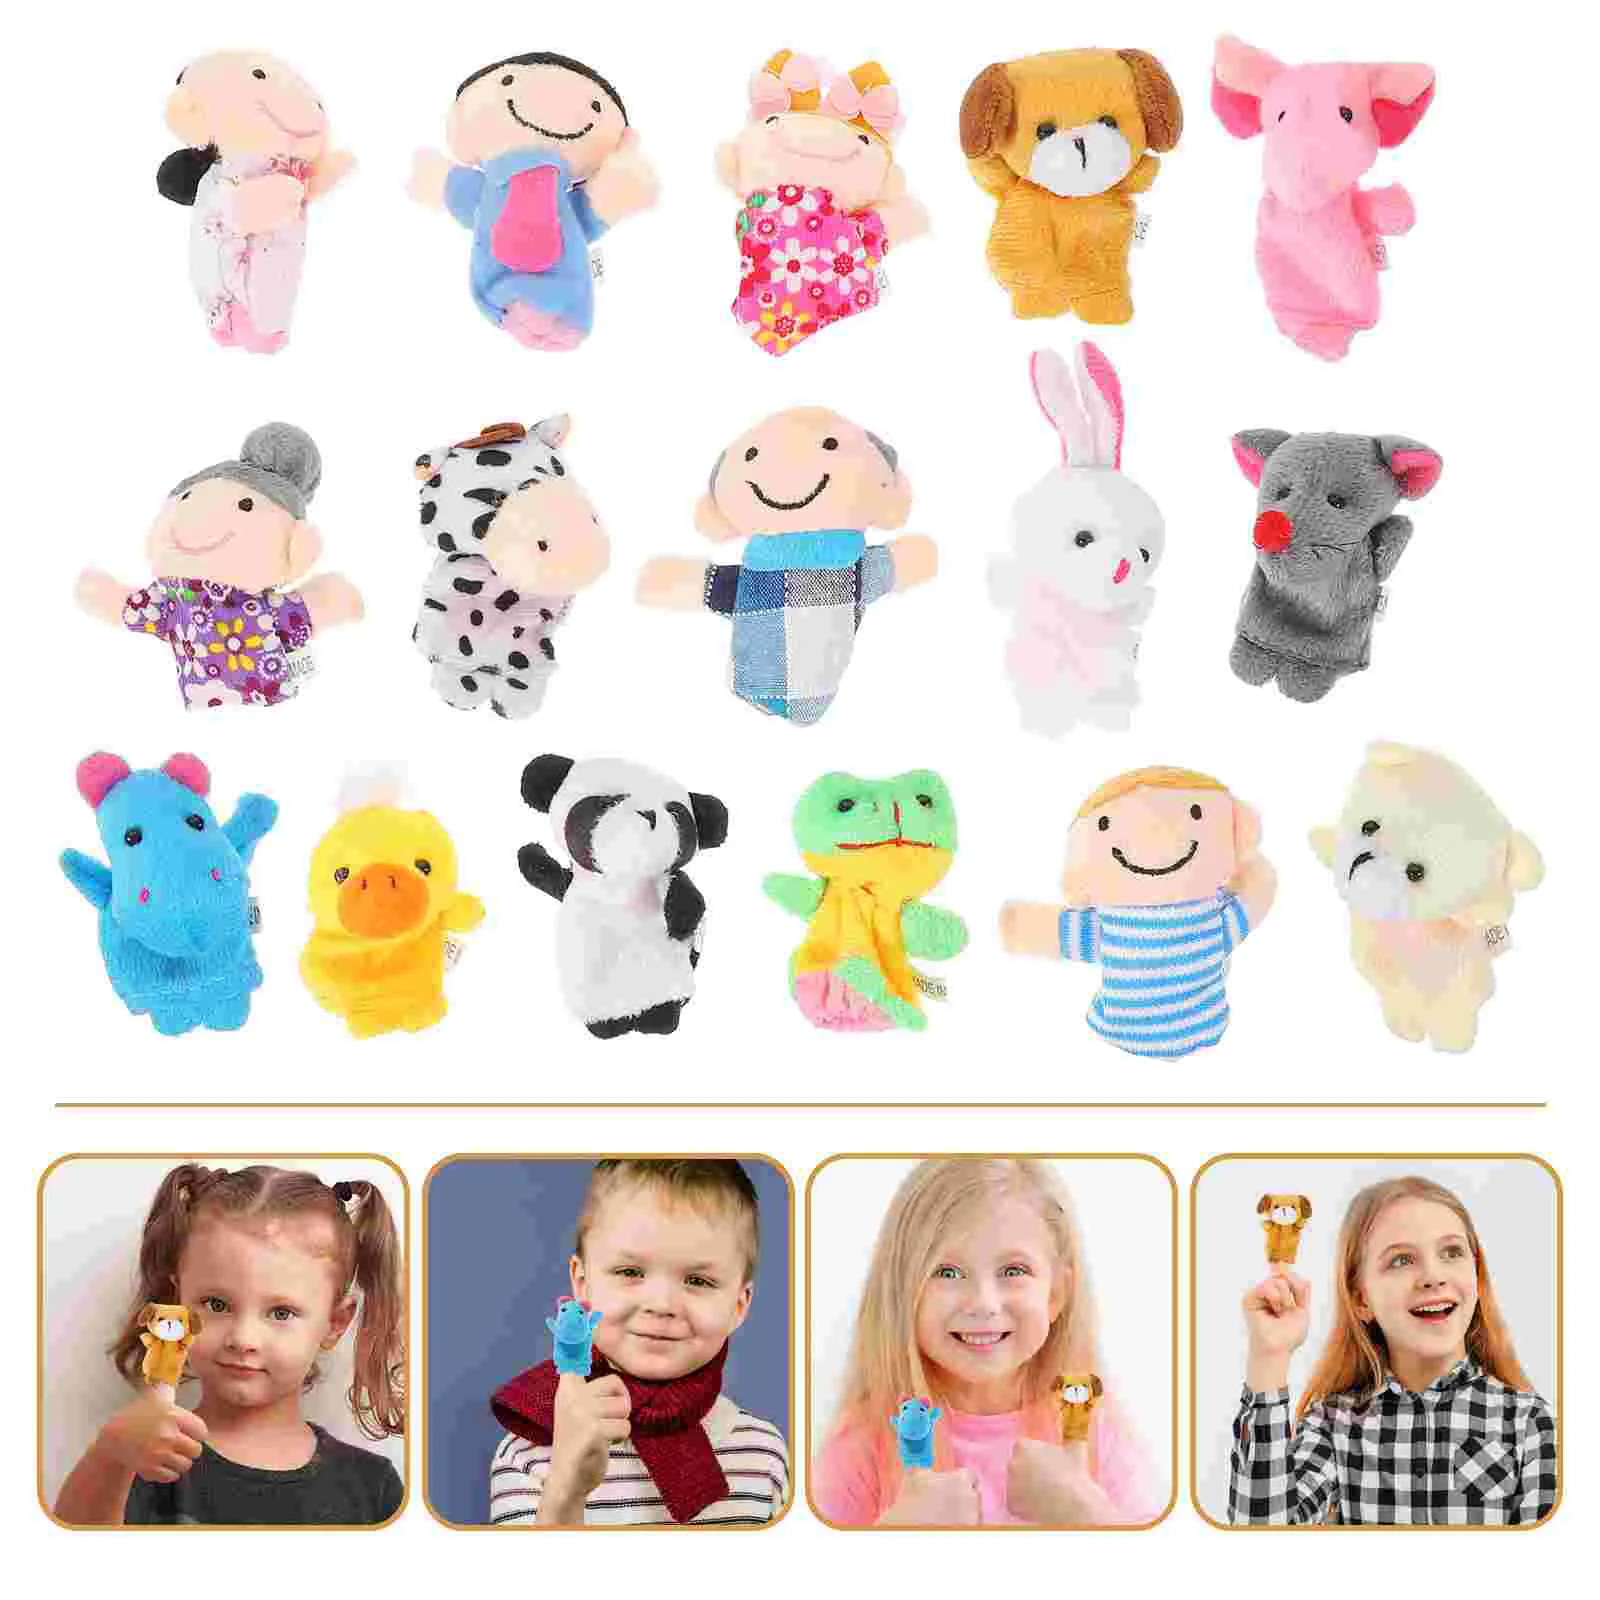 

Family Members Puppet Toys: 16pcs Plush Hand Puppets for Storytelling Teaching Preschool Role Play Props